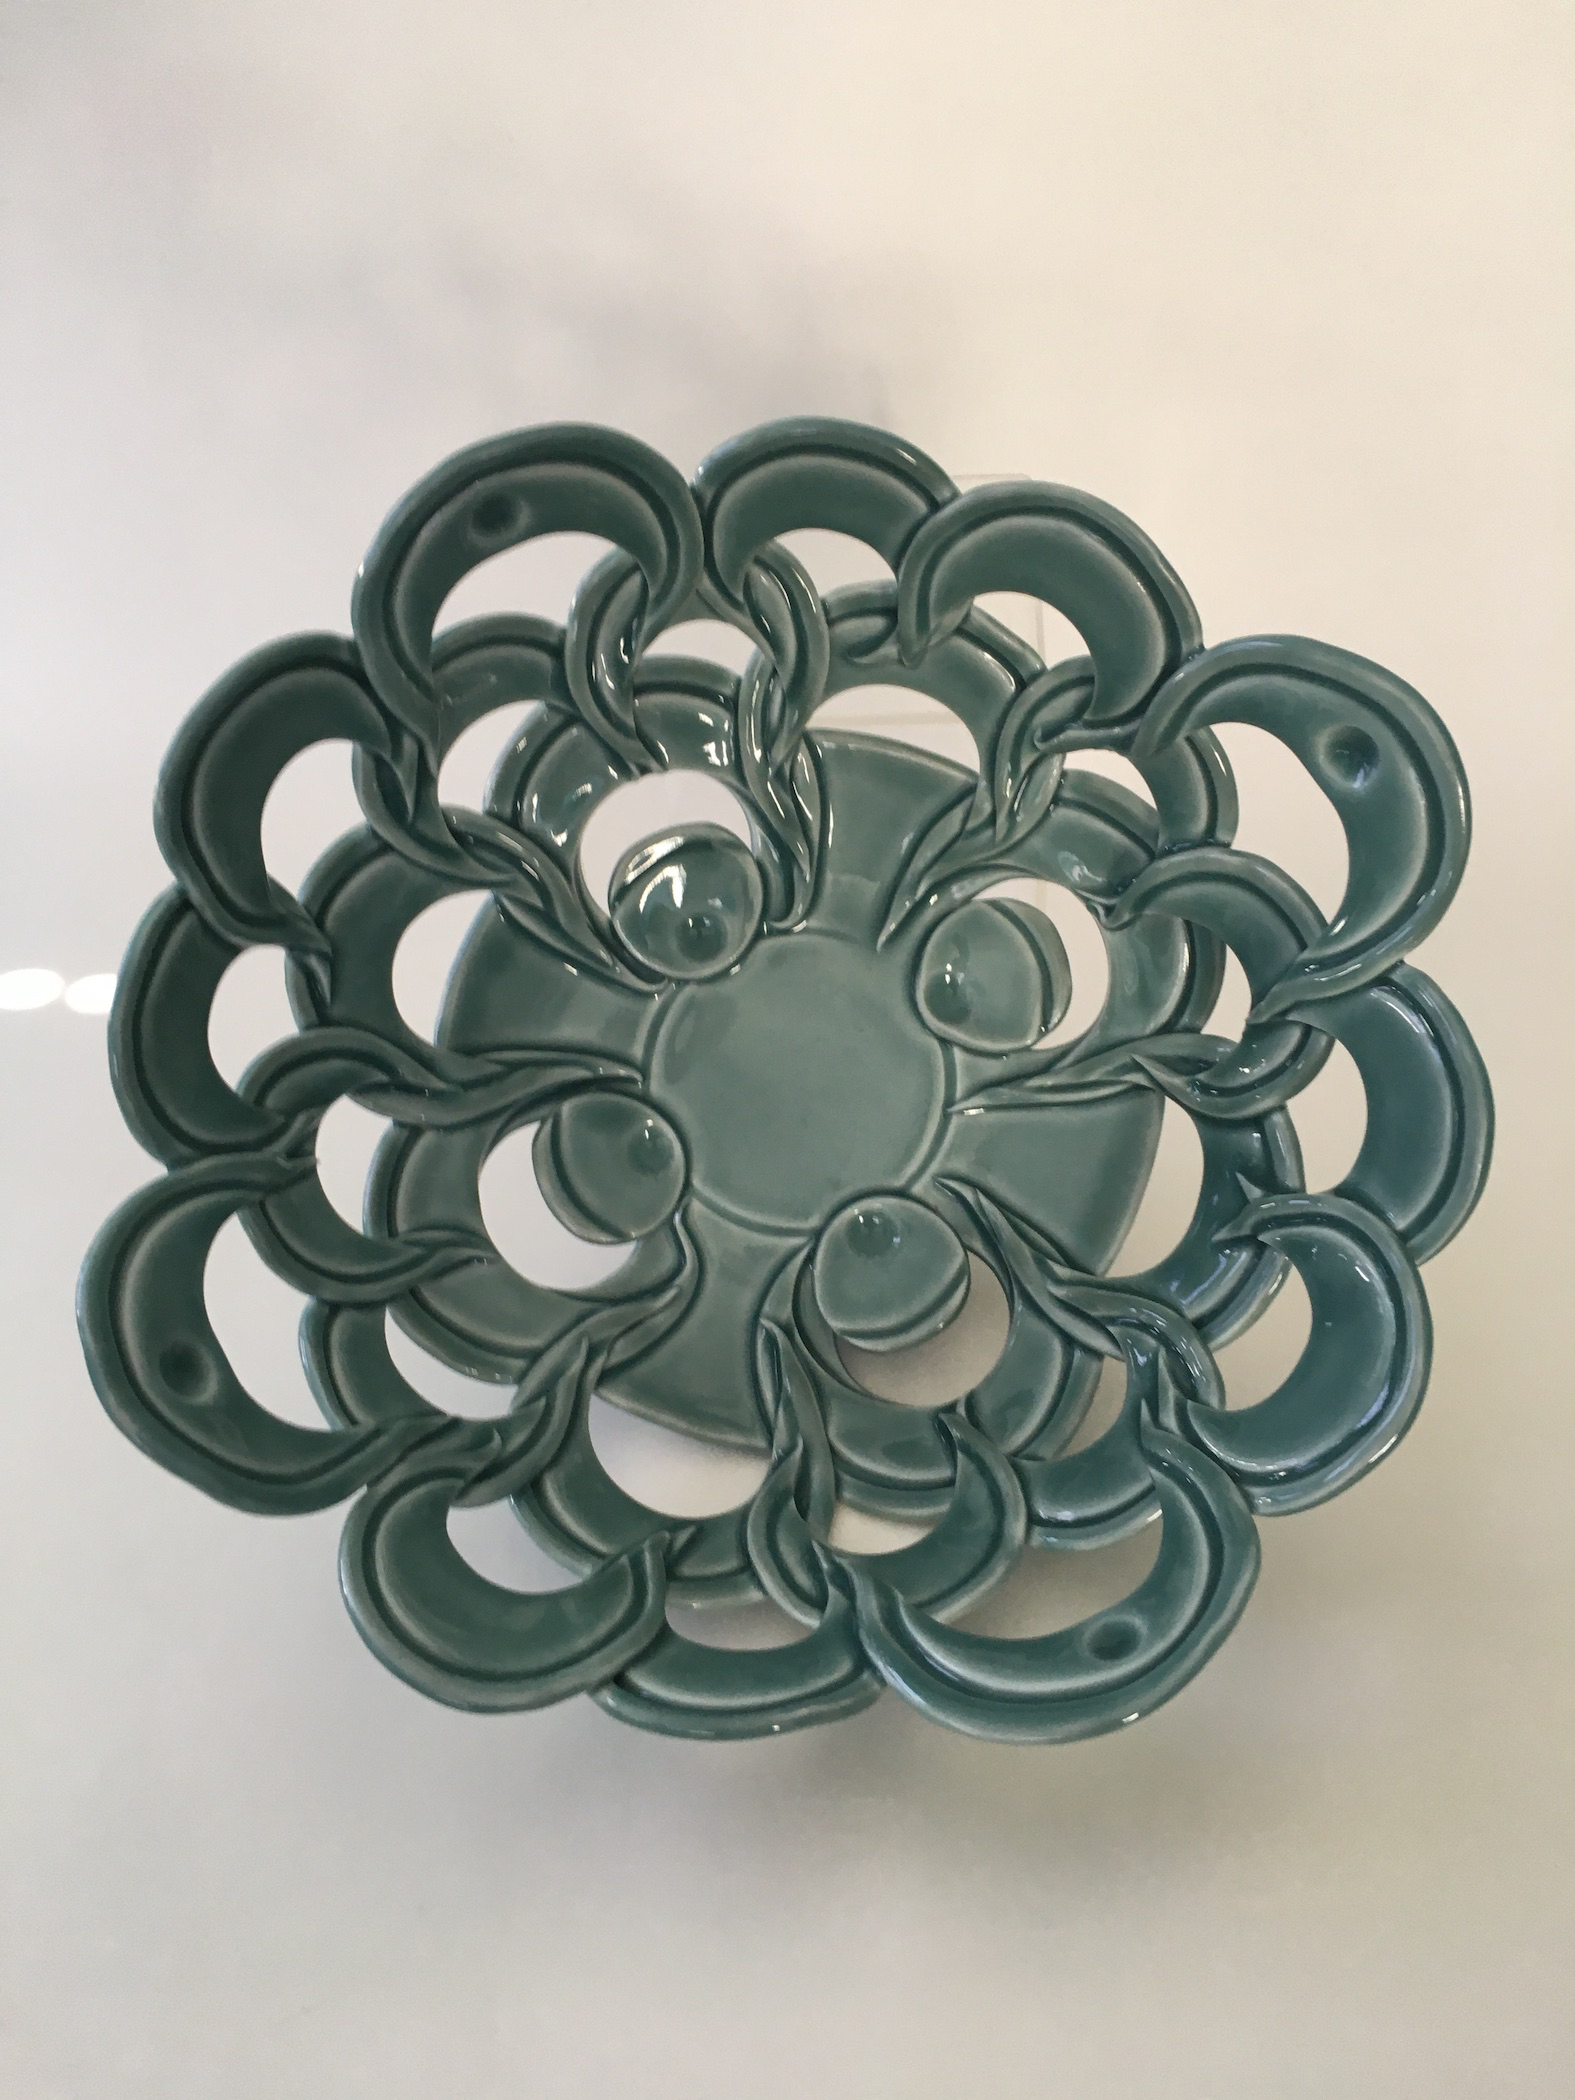 Marion Angelica’s lattice fruit bowl, 12 in. (30 cm) in diameter, handbuilt porcelain, fired  to cone 10 in reduction, 2021.